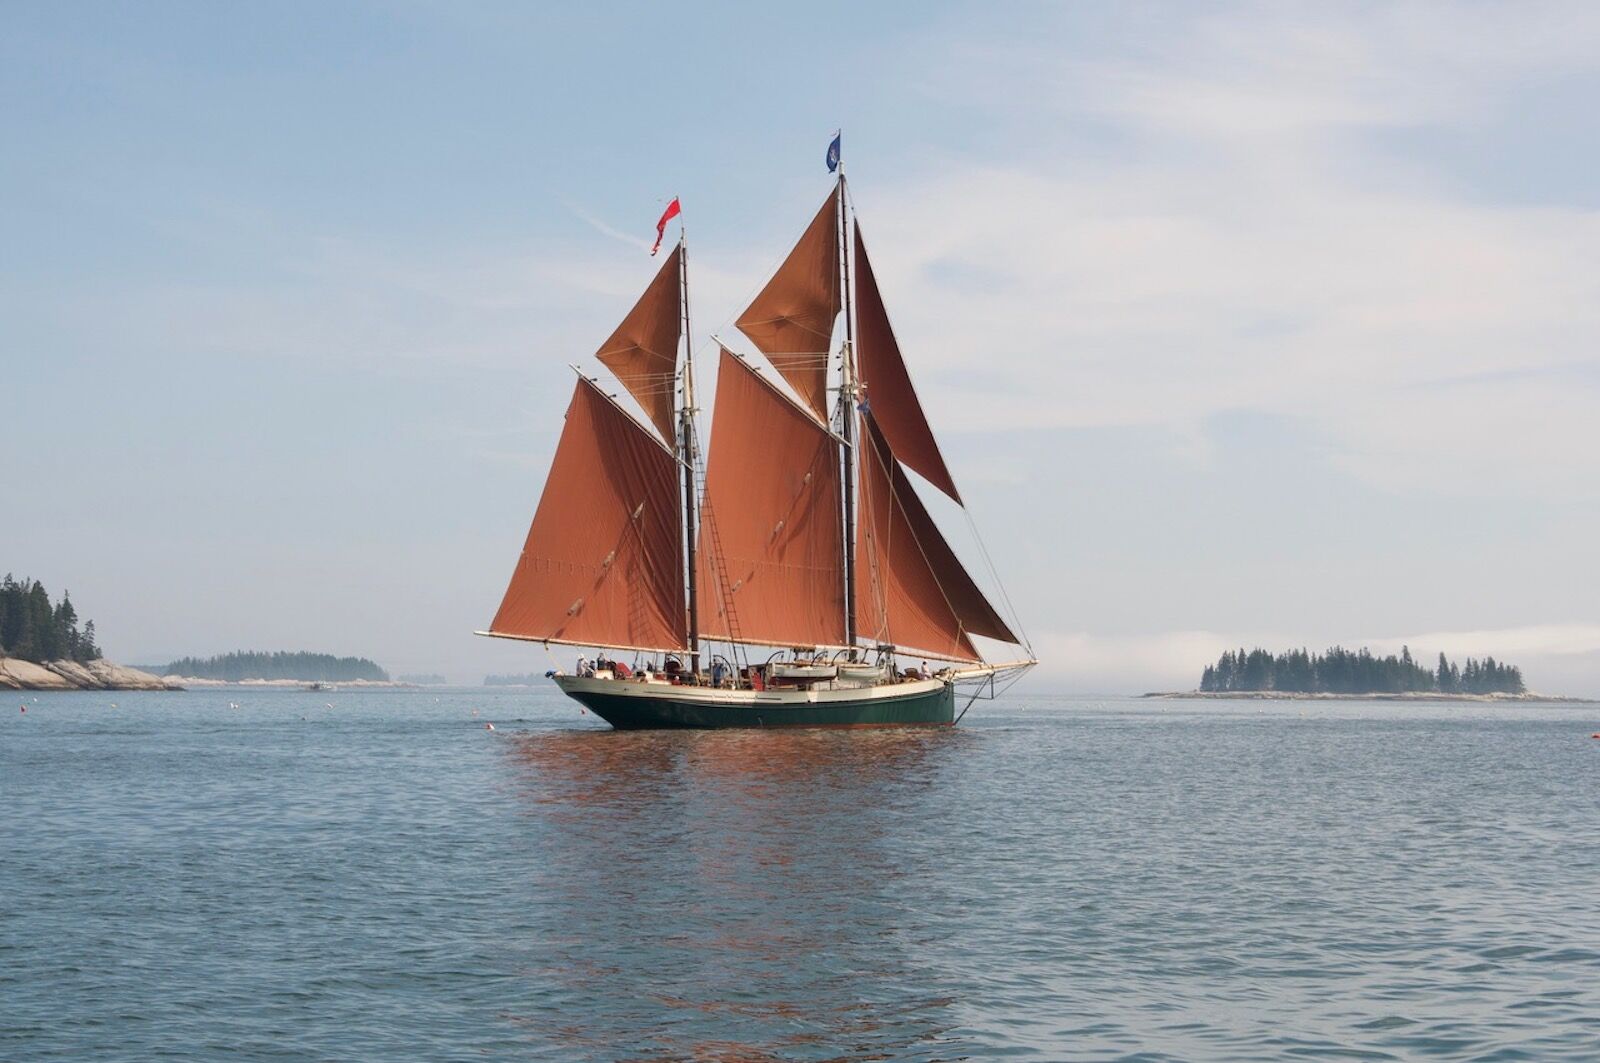 The Angelique, a traditional Maine vessel known as a windjammer, takes guests on a cruise along the coast of Maine